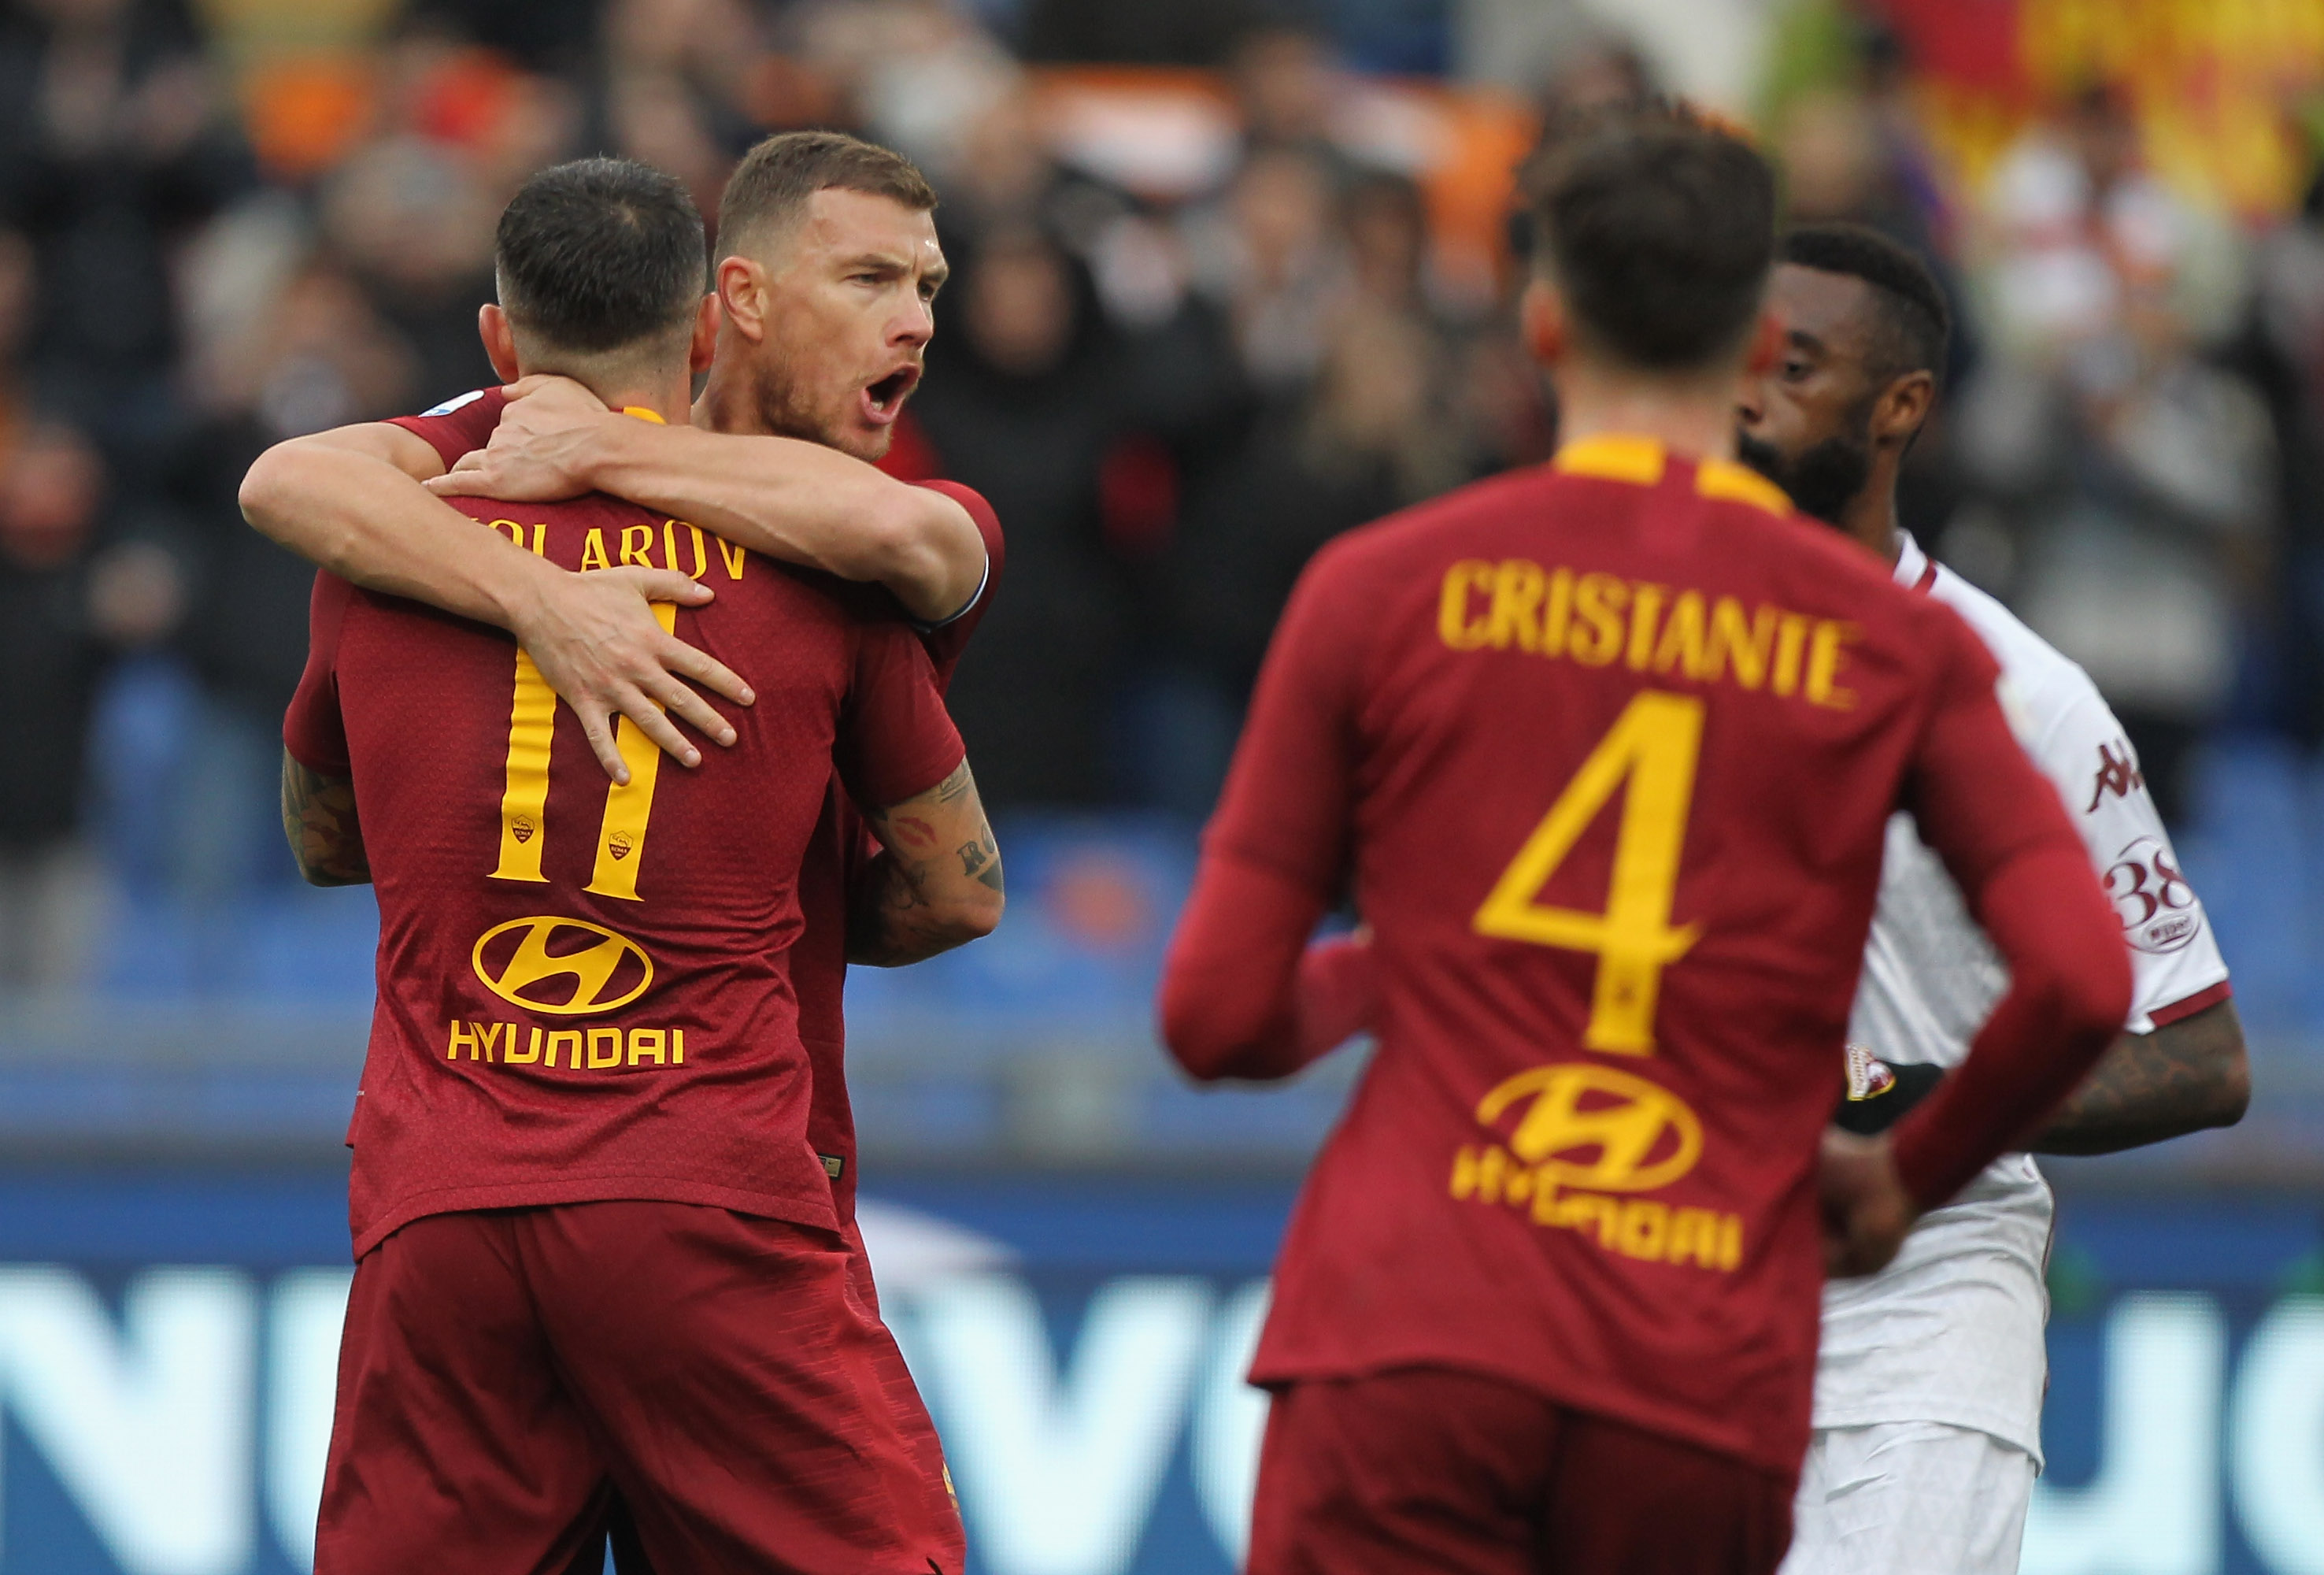 ROME, ITALY - JANUARY 19:  Aleksander Kolarov with his teammate Edin Dzeko of AS Roma celebrates after scoring the team's second goal from penalty spot during the Serie A match between AS Roma and Torino FC at Stadio Olimpico on January 19, 2019 in Rome, Italy.  (Photo by Paolo Bruno/Getty Images)